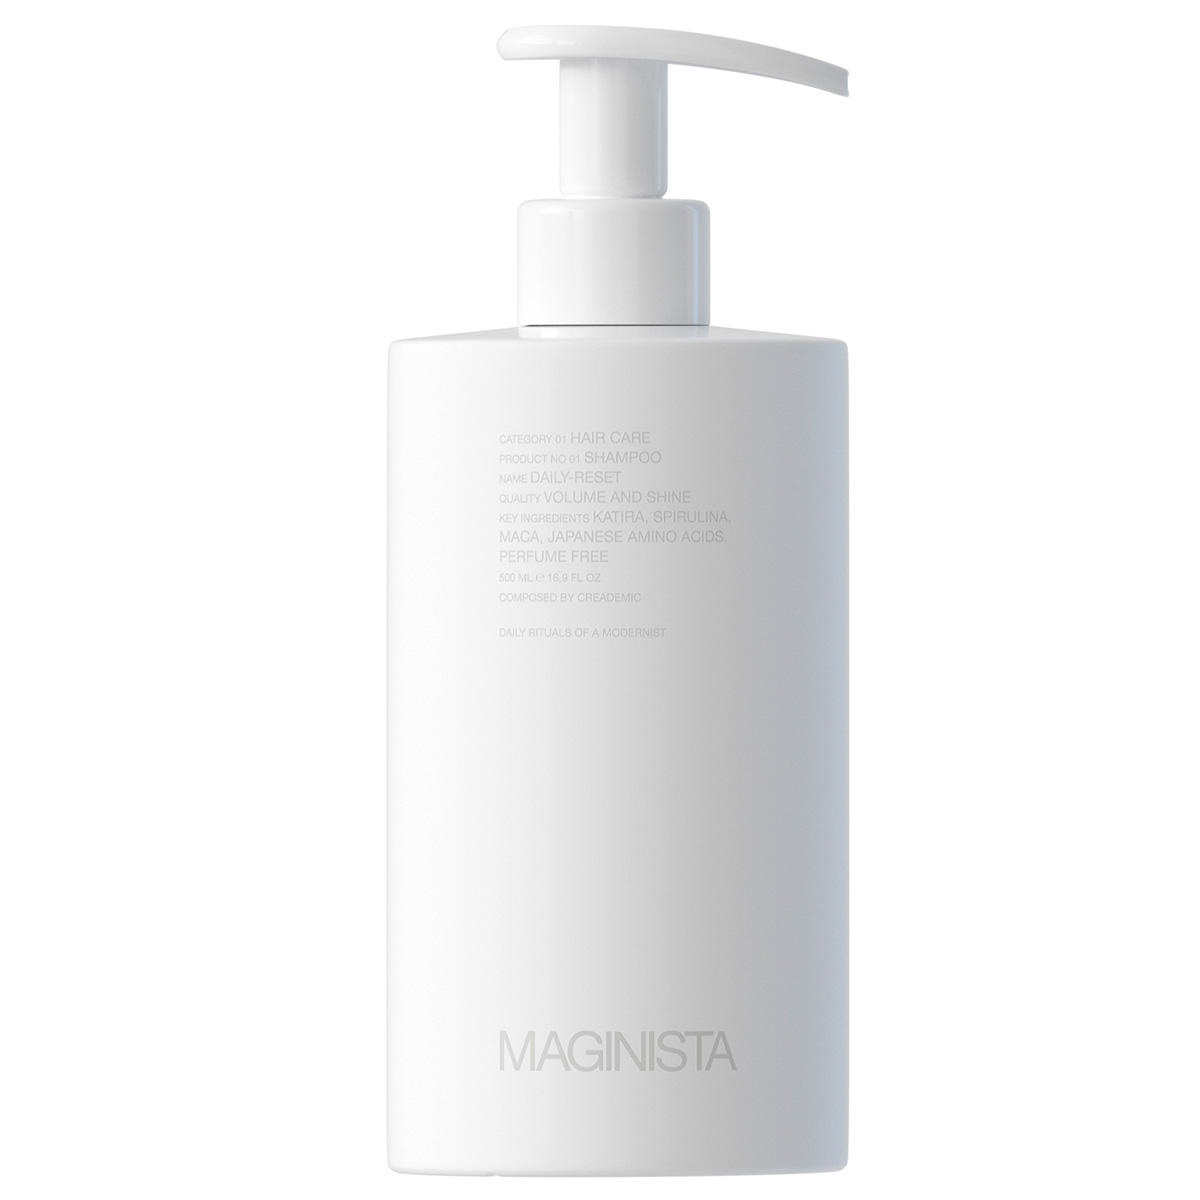 MAGINISTA Daily-Reset Shampoo Fragrance Free  - 1